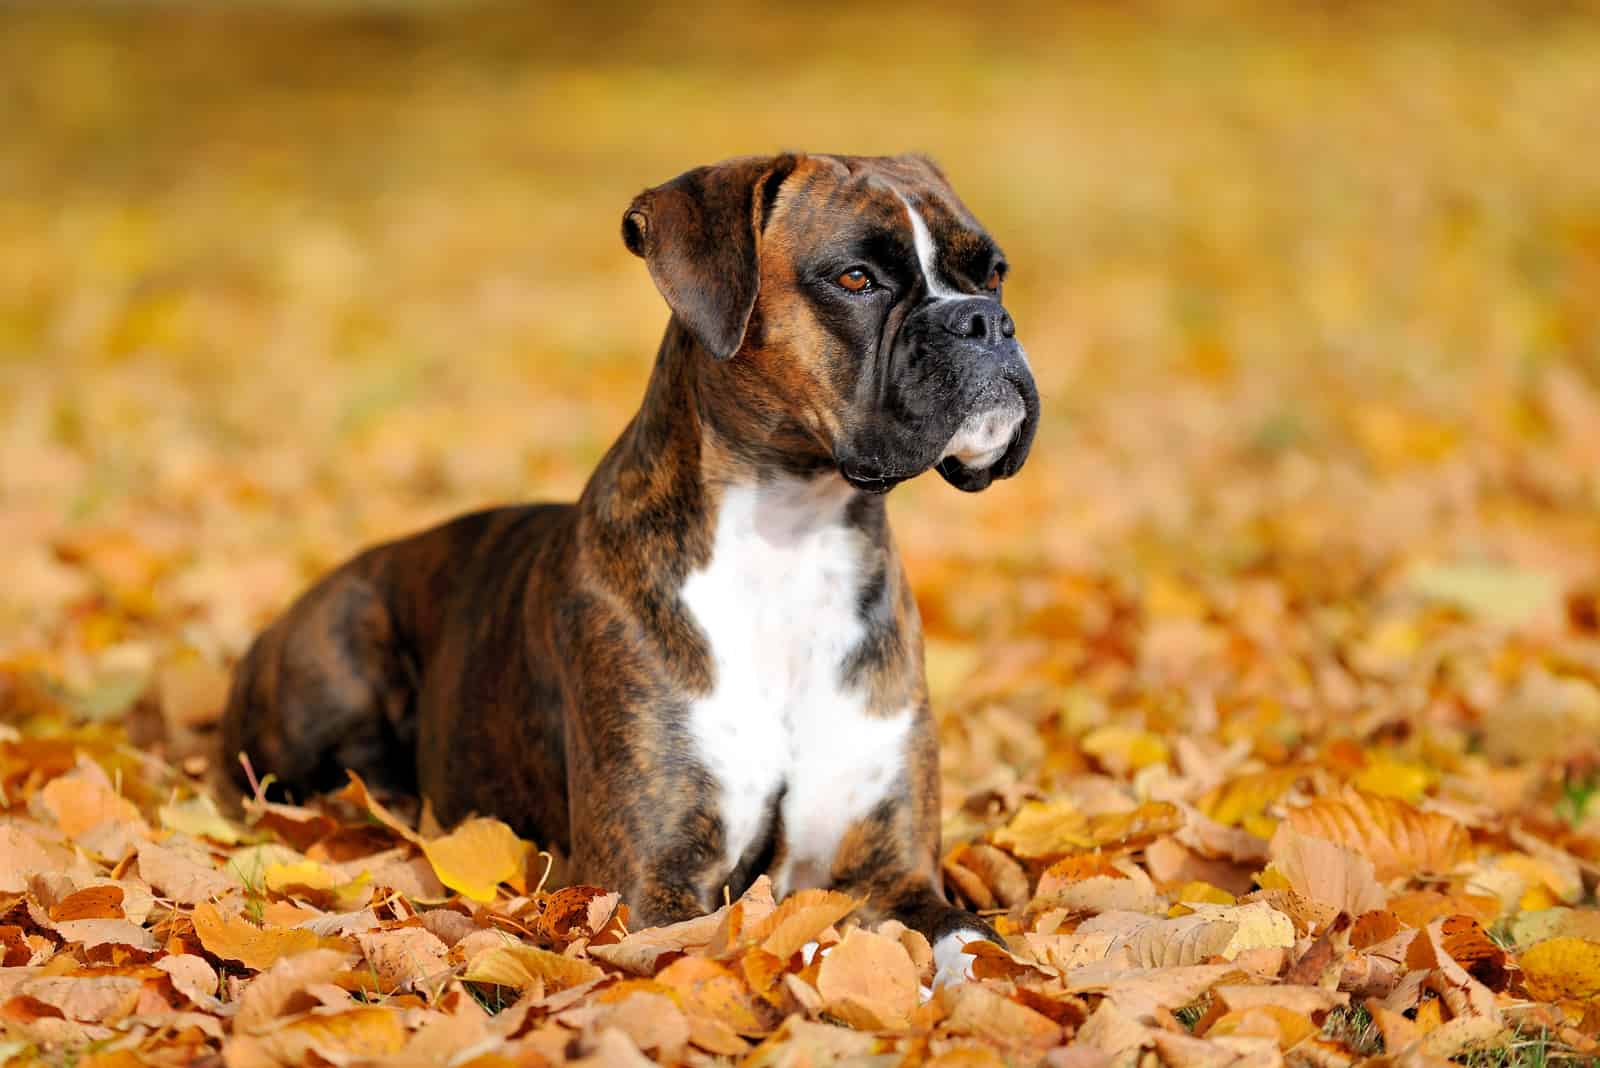 boxer dog lying in autumn leaves